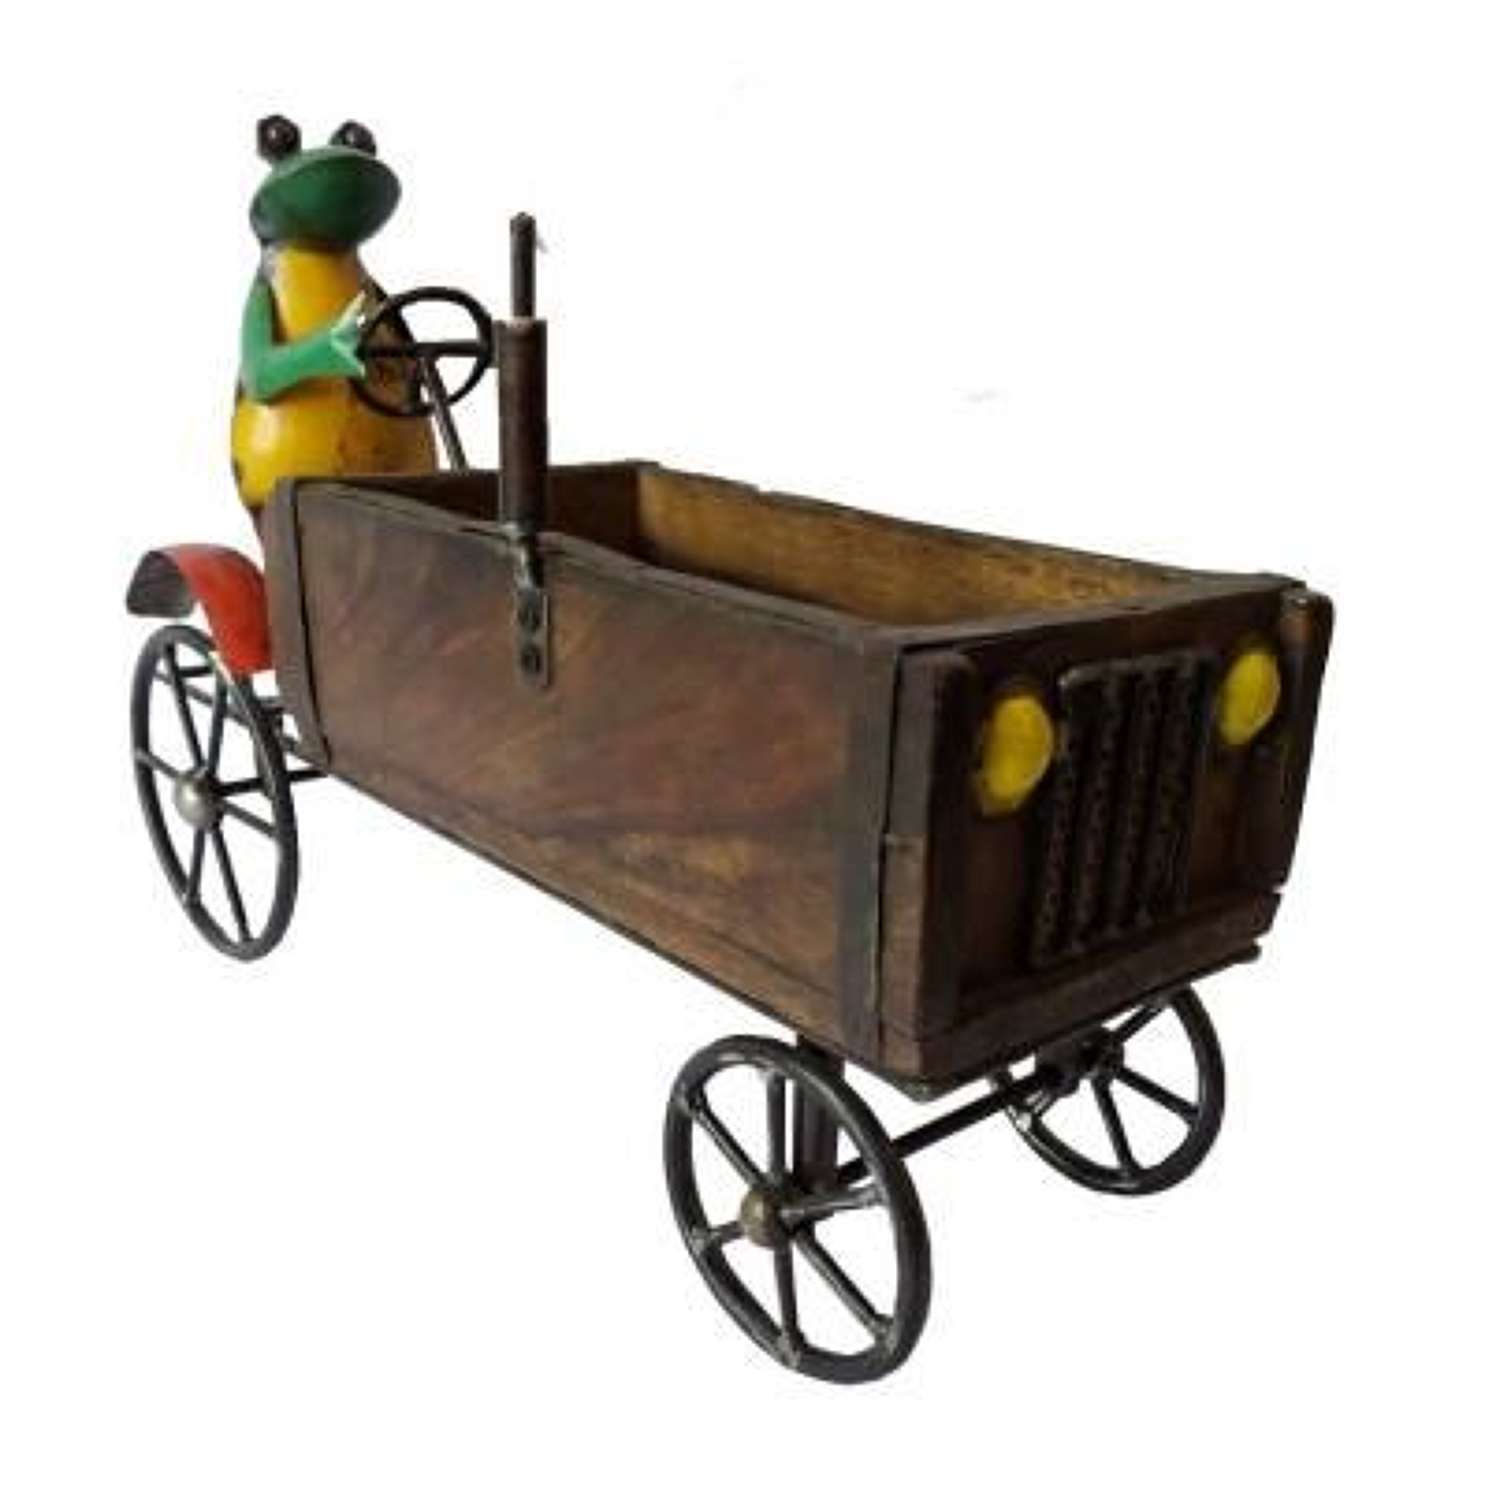 Recycled Iron Frog with Wooden Tractor Planter. Ref MH-6157